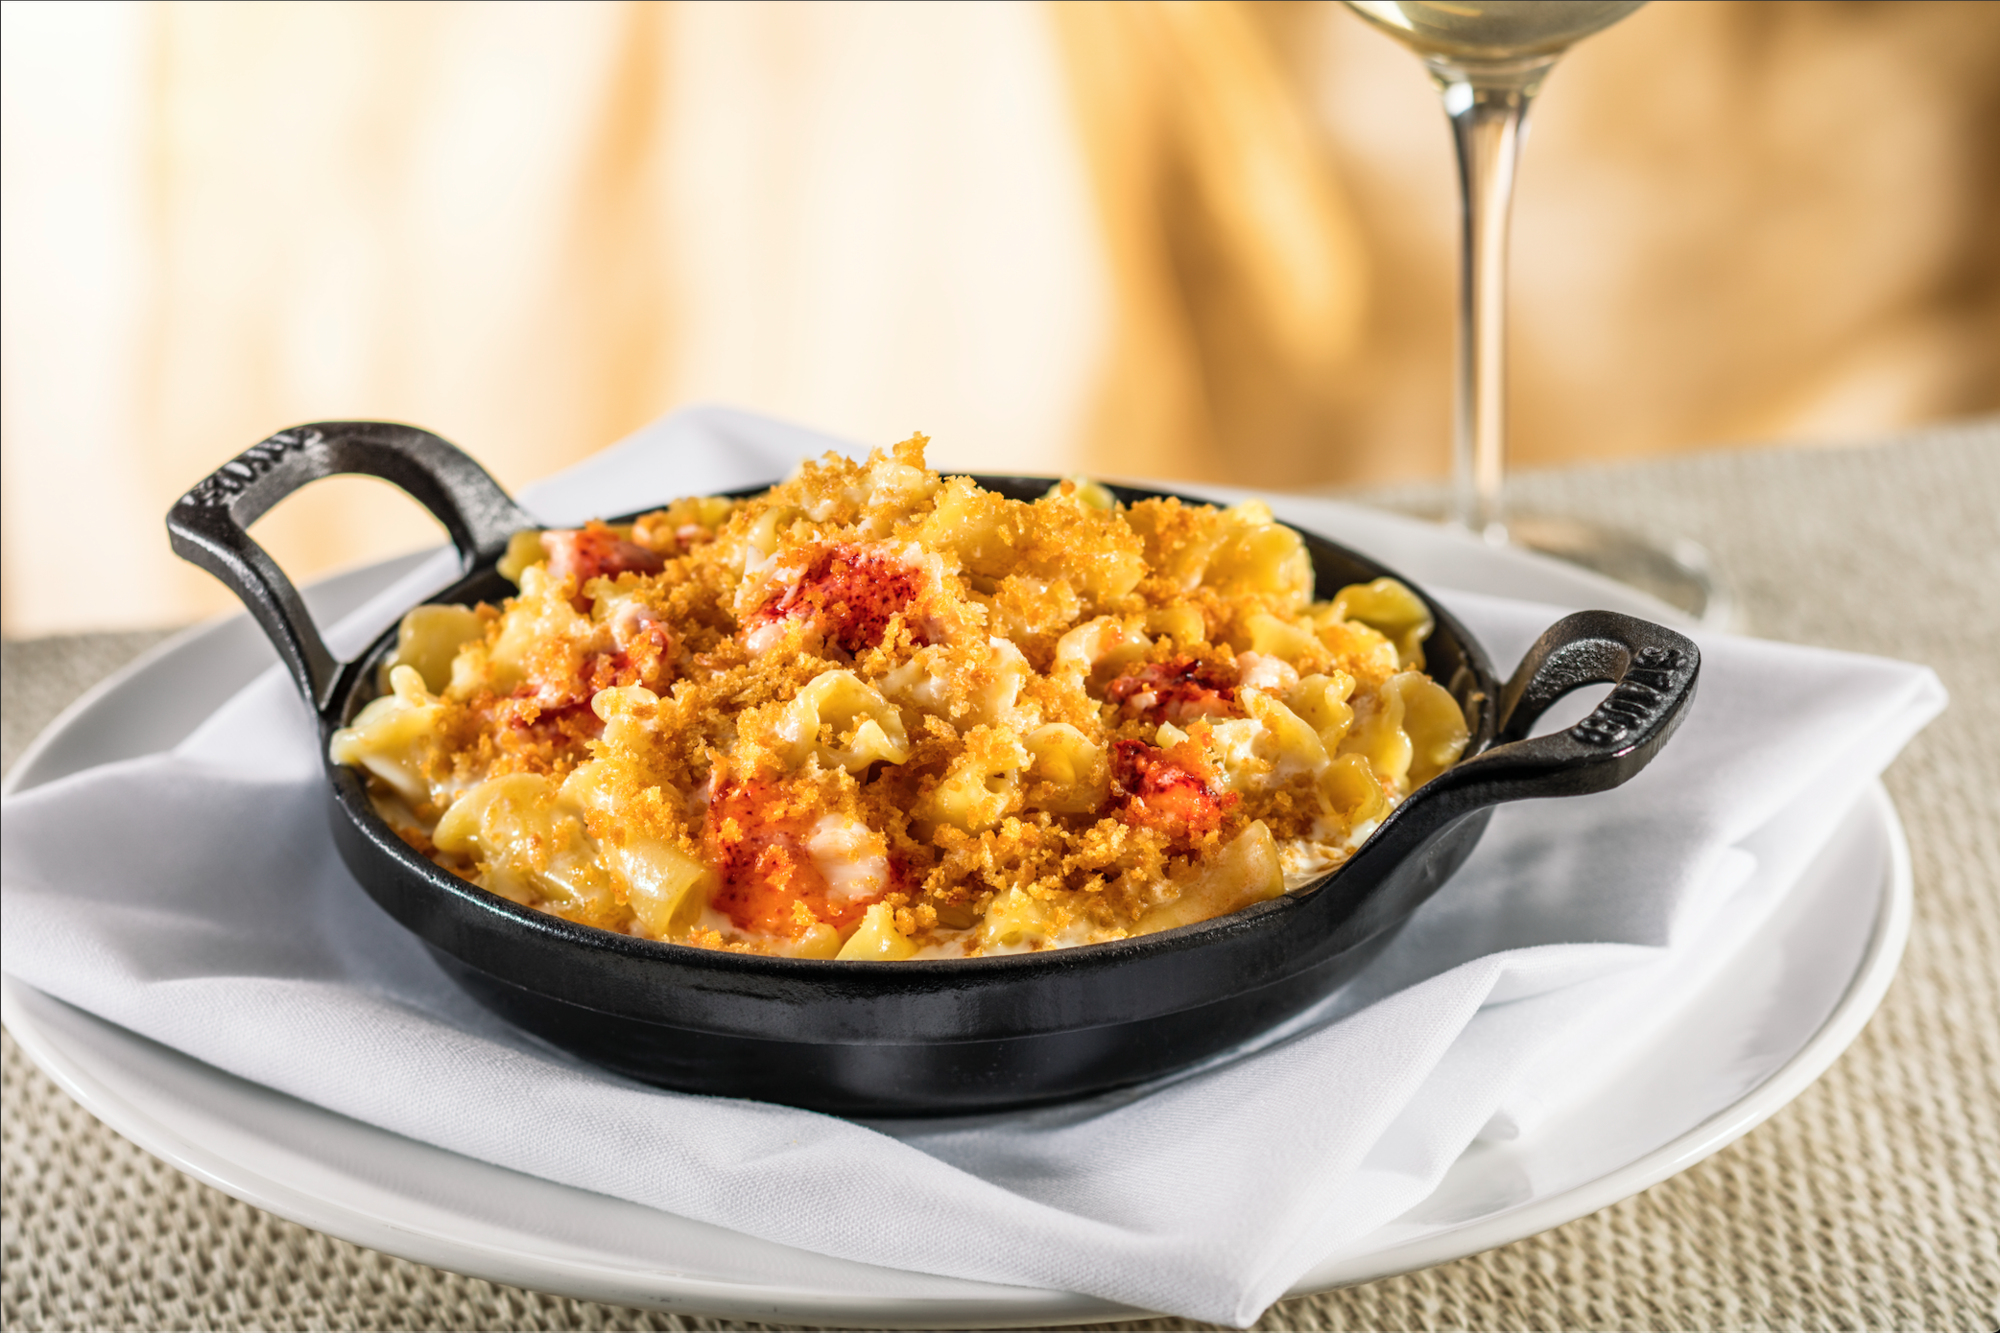 Order Capital Grille’s Lobster Mac ‘N’ Cheese to share – then there’s “surf” for everyone.